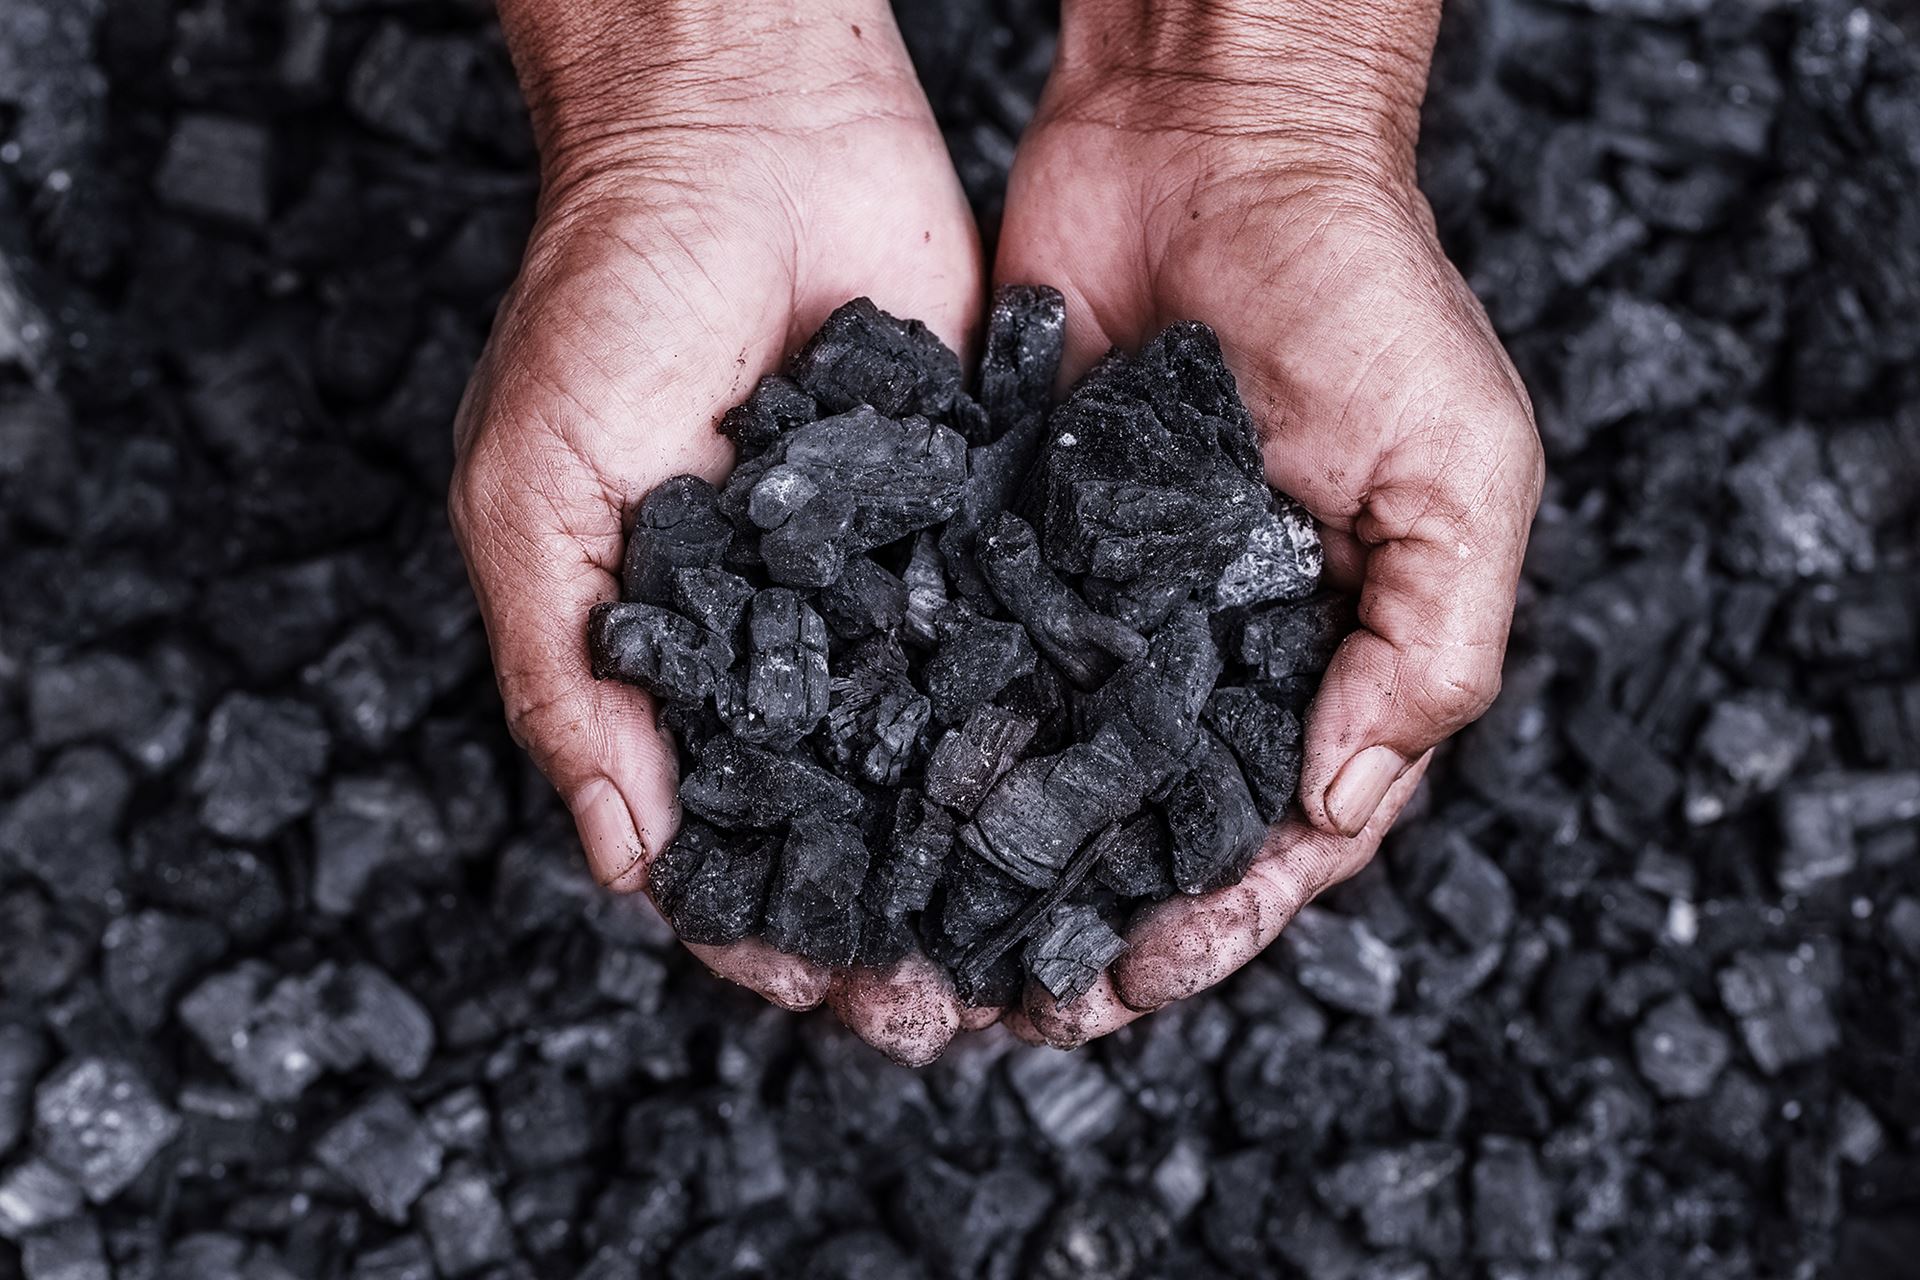 Coking Coal for steel production and alternatives - Front Line Action on  Coal